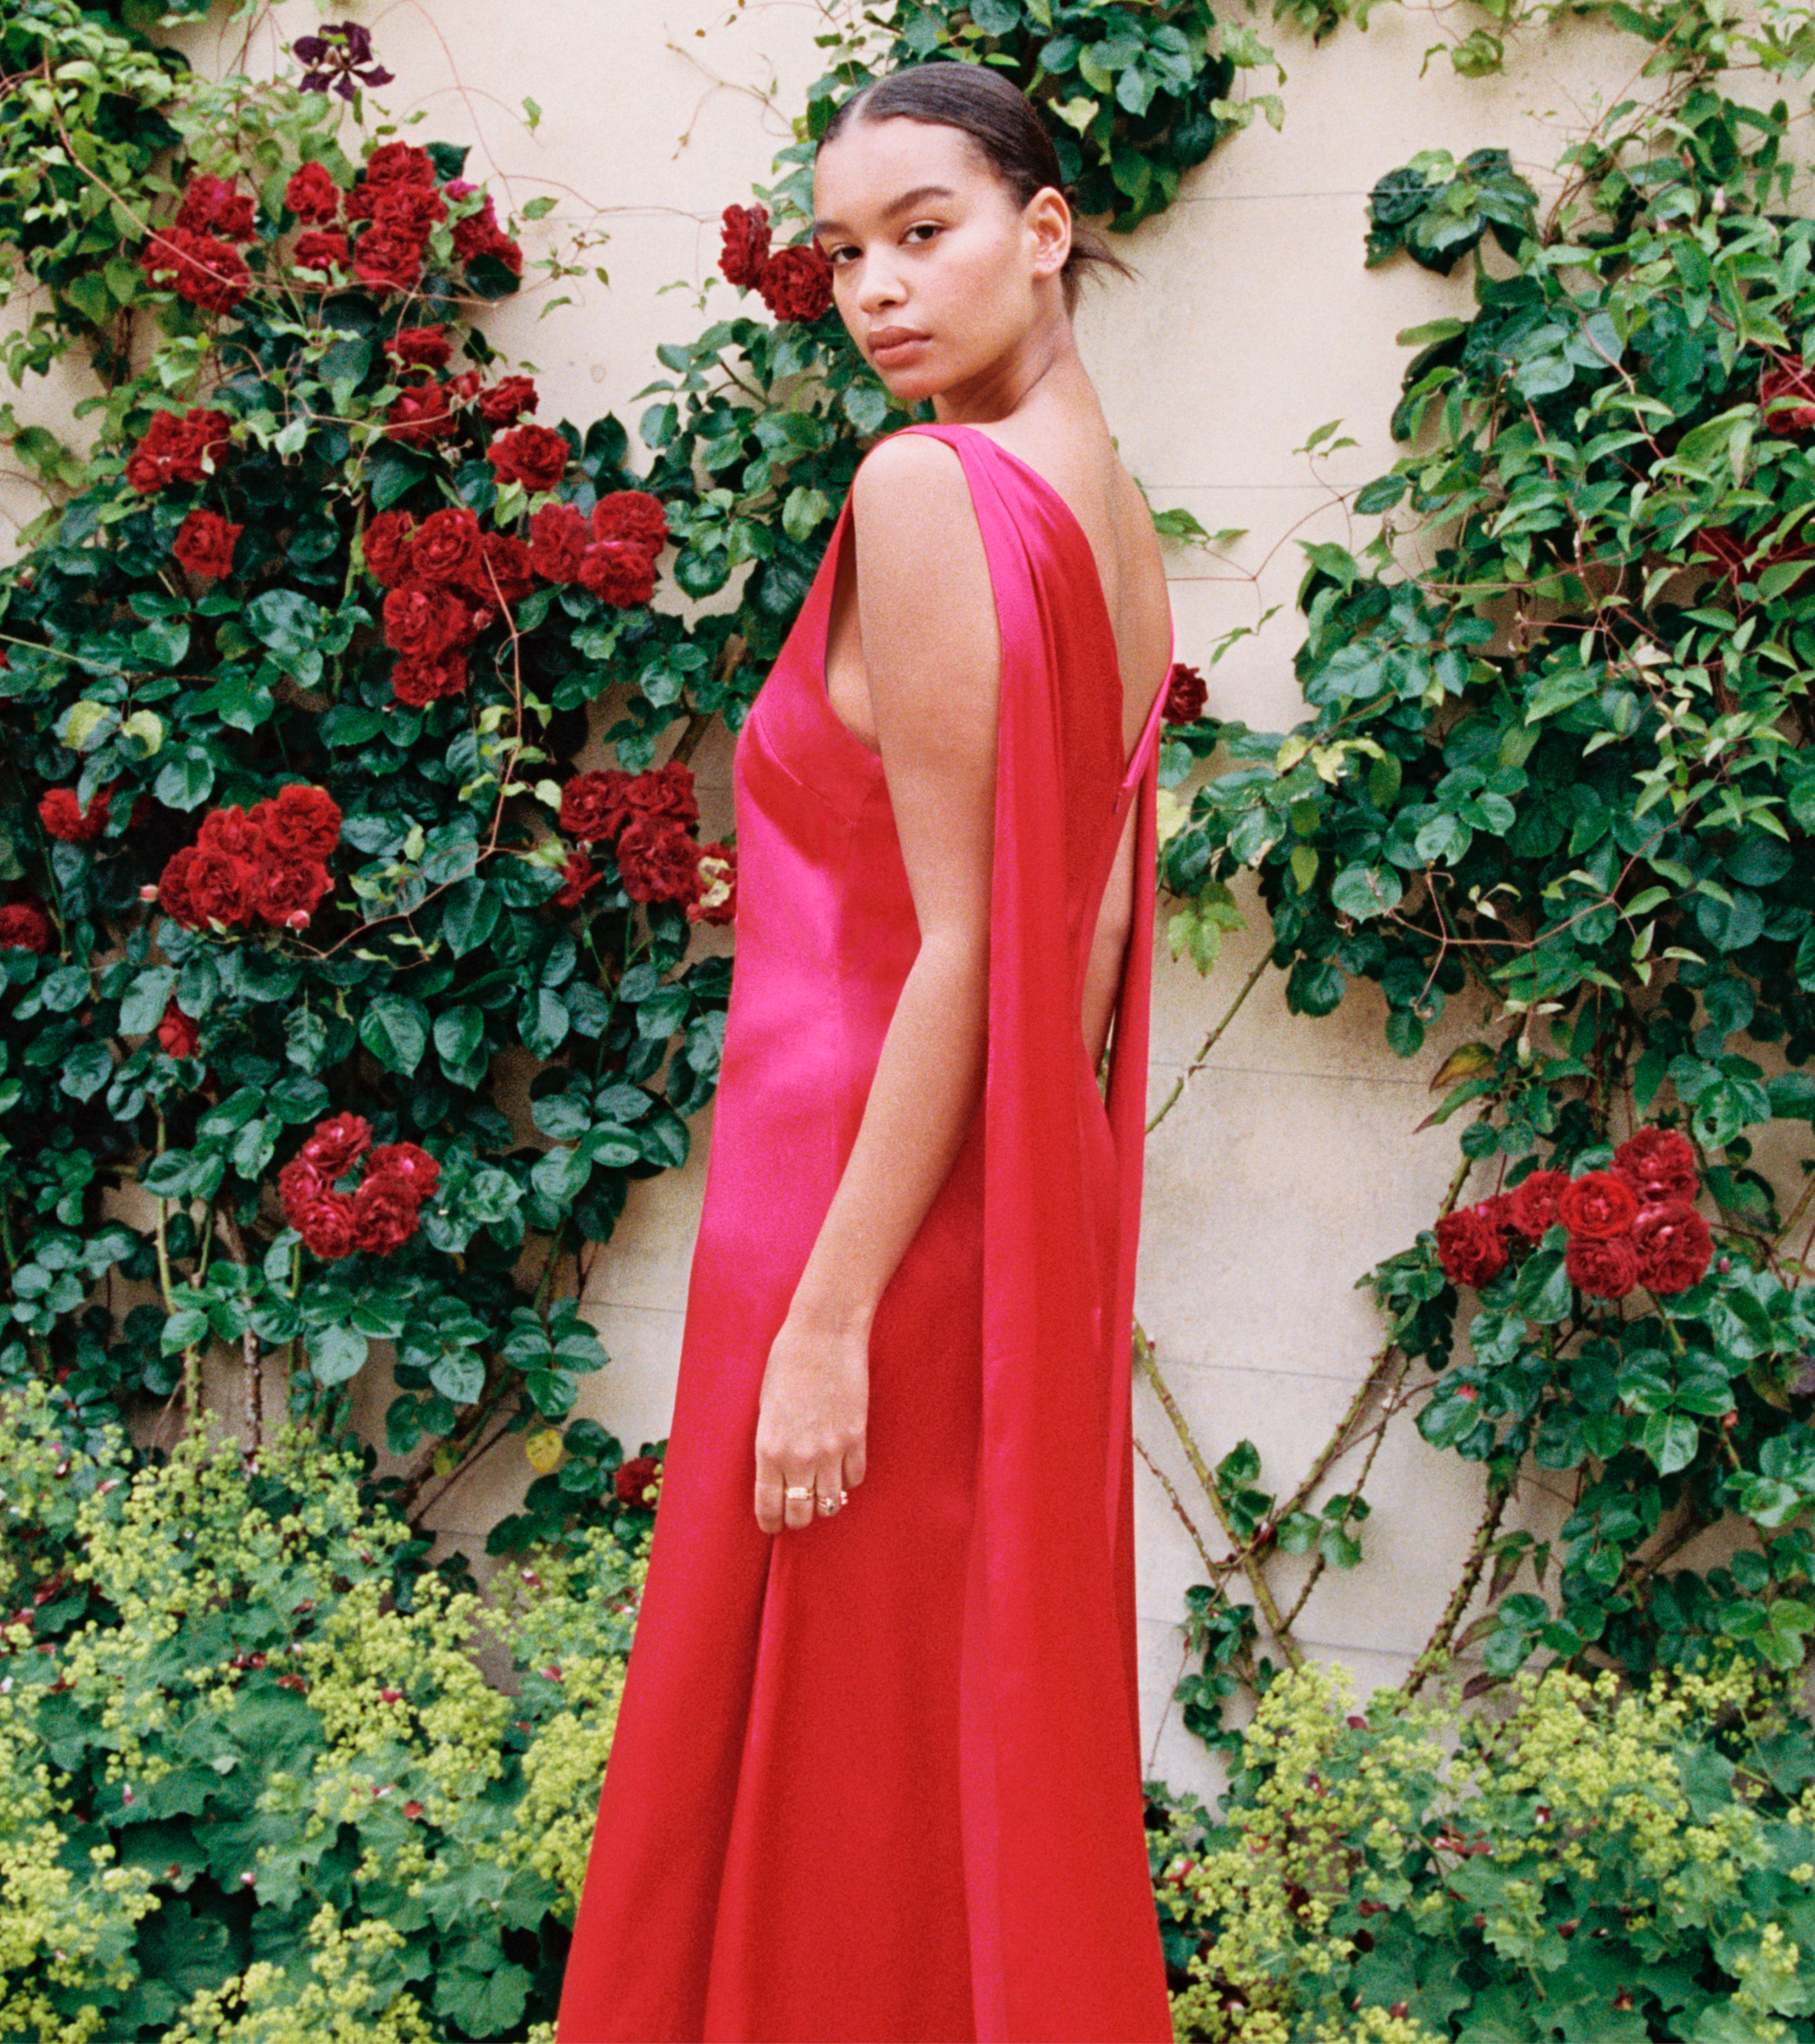 The silk evening dress inspired by the Highgrove Rose